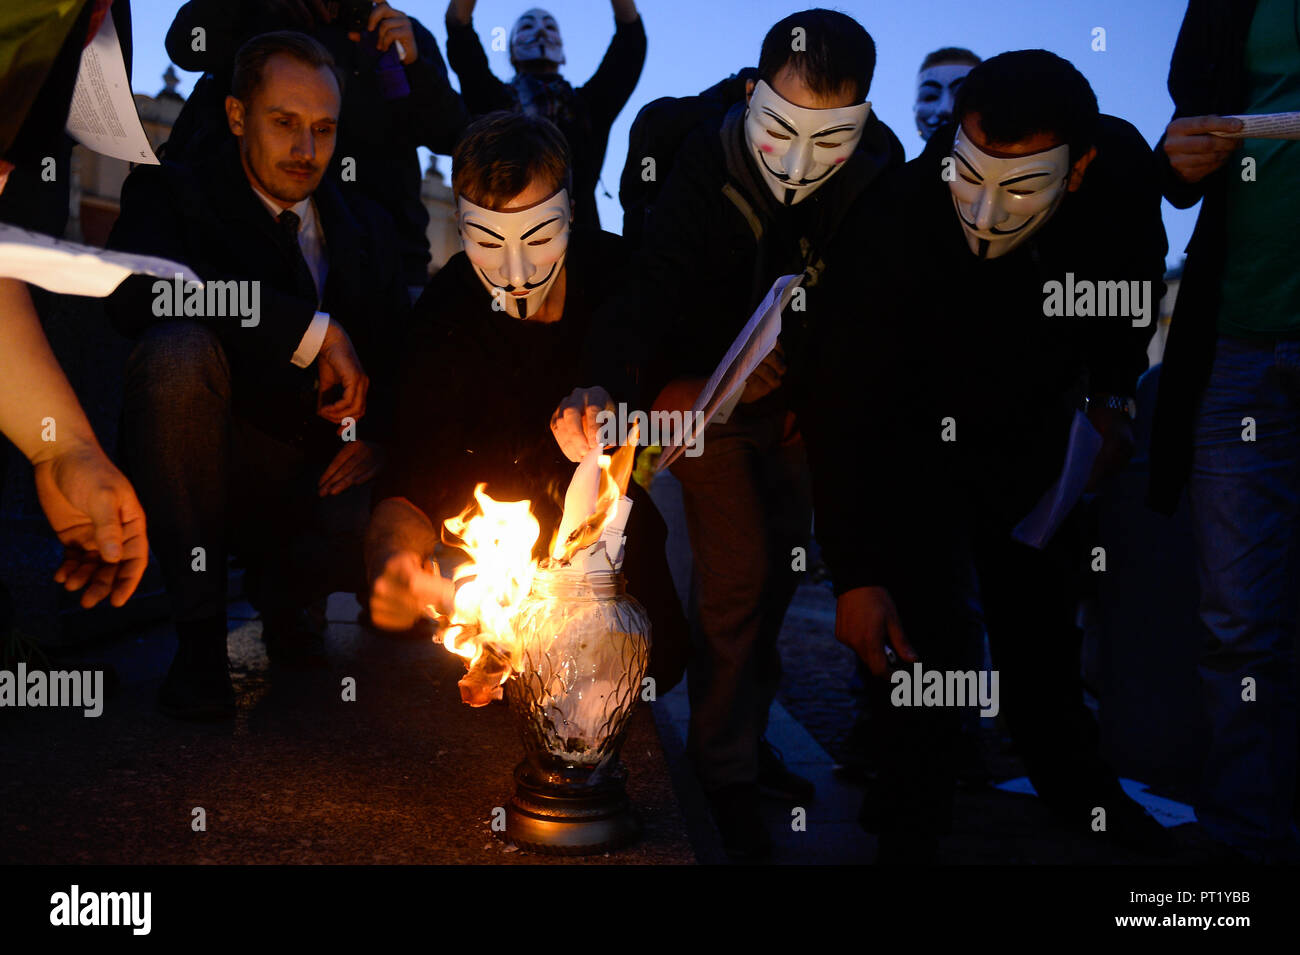 Krakow, Poland. 5th Oct, 2018. Protesters with Guy Fawkes masks seen burning the European Commission Copyright Directive during the demonstration.Protest against the implemented EU Copyright Directive (known as ACTA 2.0) in front of Adam Mickiewicz Monument at the Main Square. On September 12, 2018 an updated version of the controversial articles 11 and 13 of the Directive on Copyright in the Digital Single Market were approved by the European Parliament. EU claims that article 11 and 13 aim to protect the copyrights and to bring profits to news outlets, artists and others when social med Cred Stock Photo